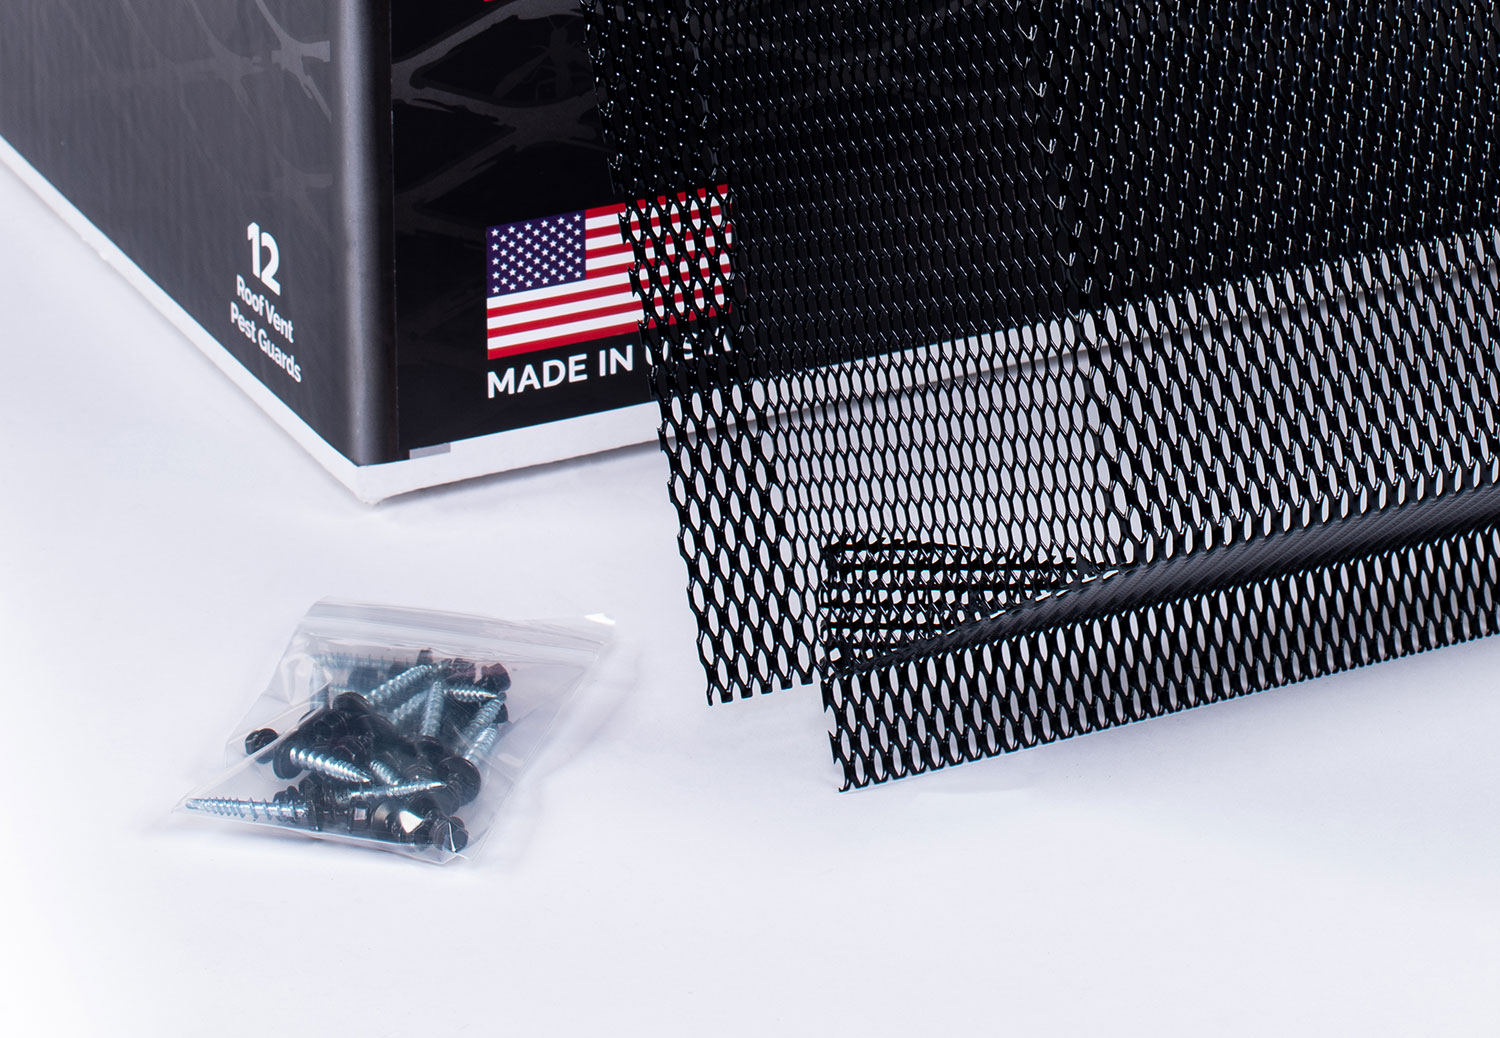 XclusionPro® XP Kit includes vents and screws